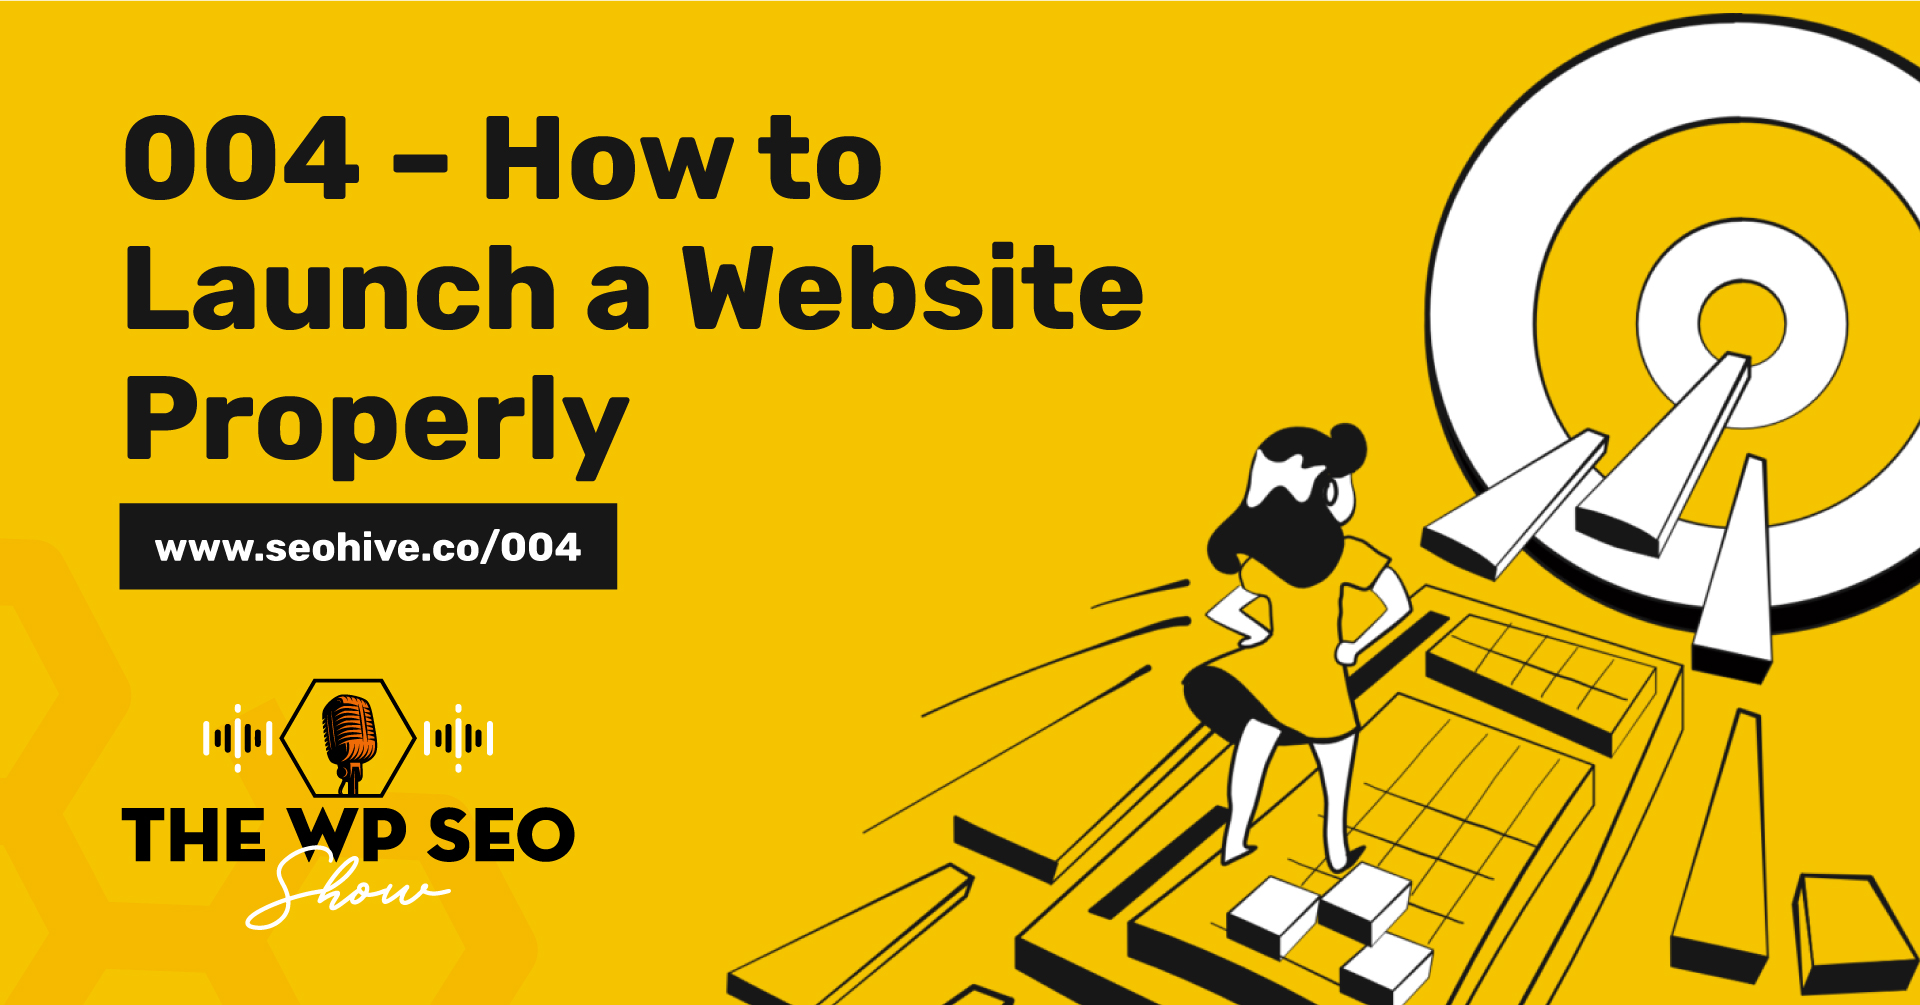 004 – How to Launch a Website Properly